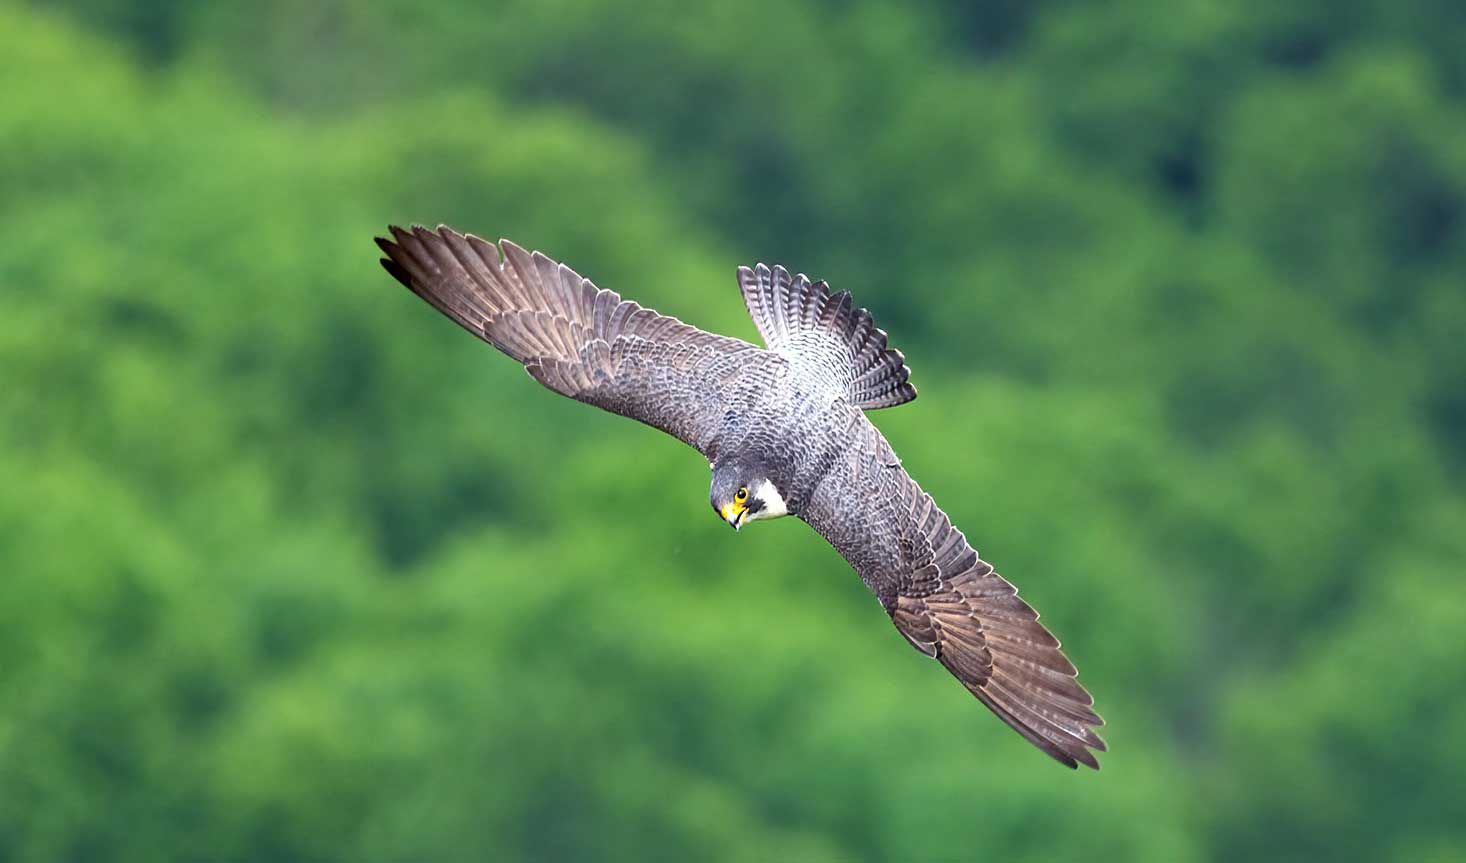 A peregrine falcon dives with wings outstretched and blurred green trees in the background.